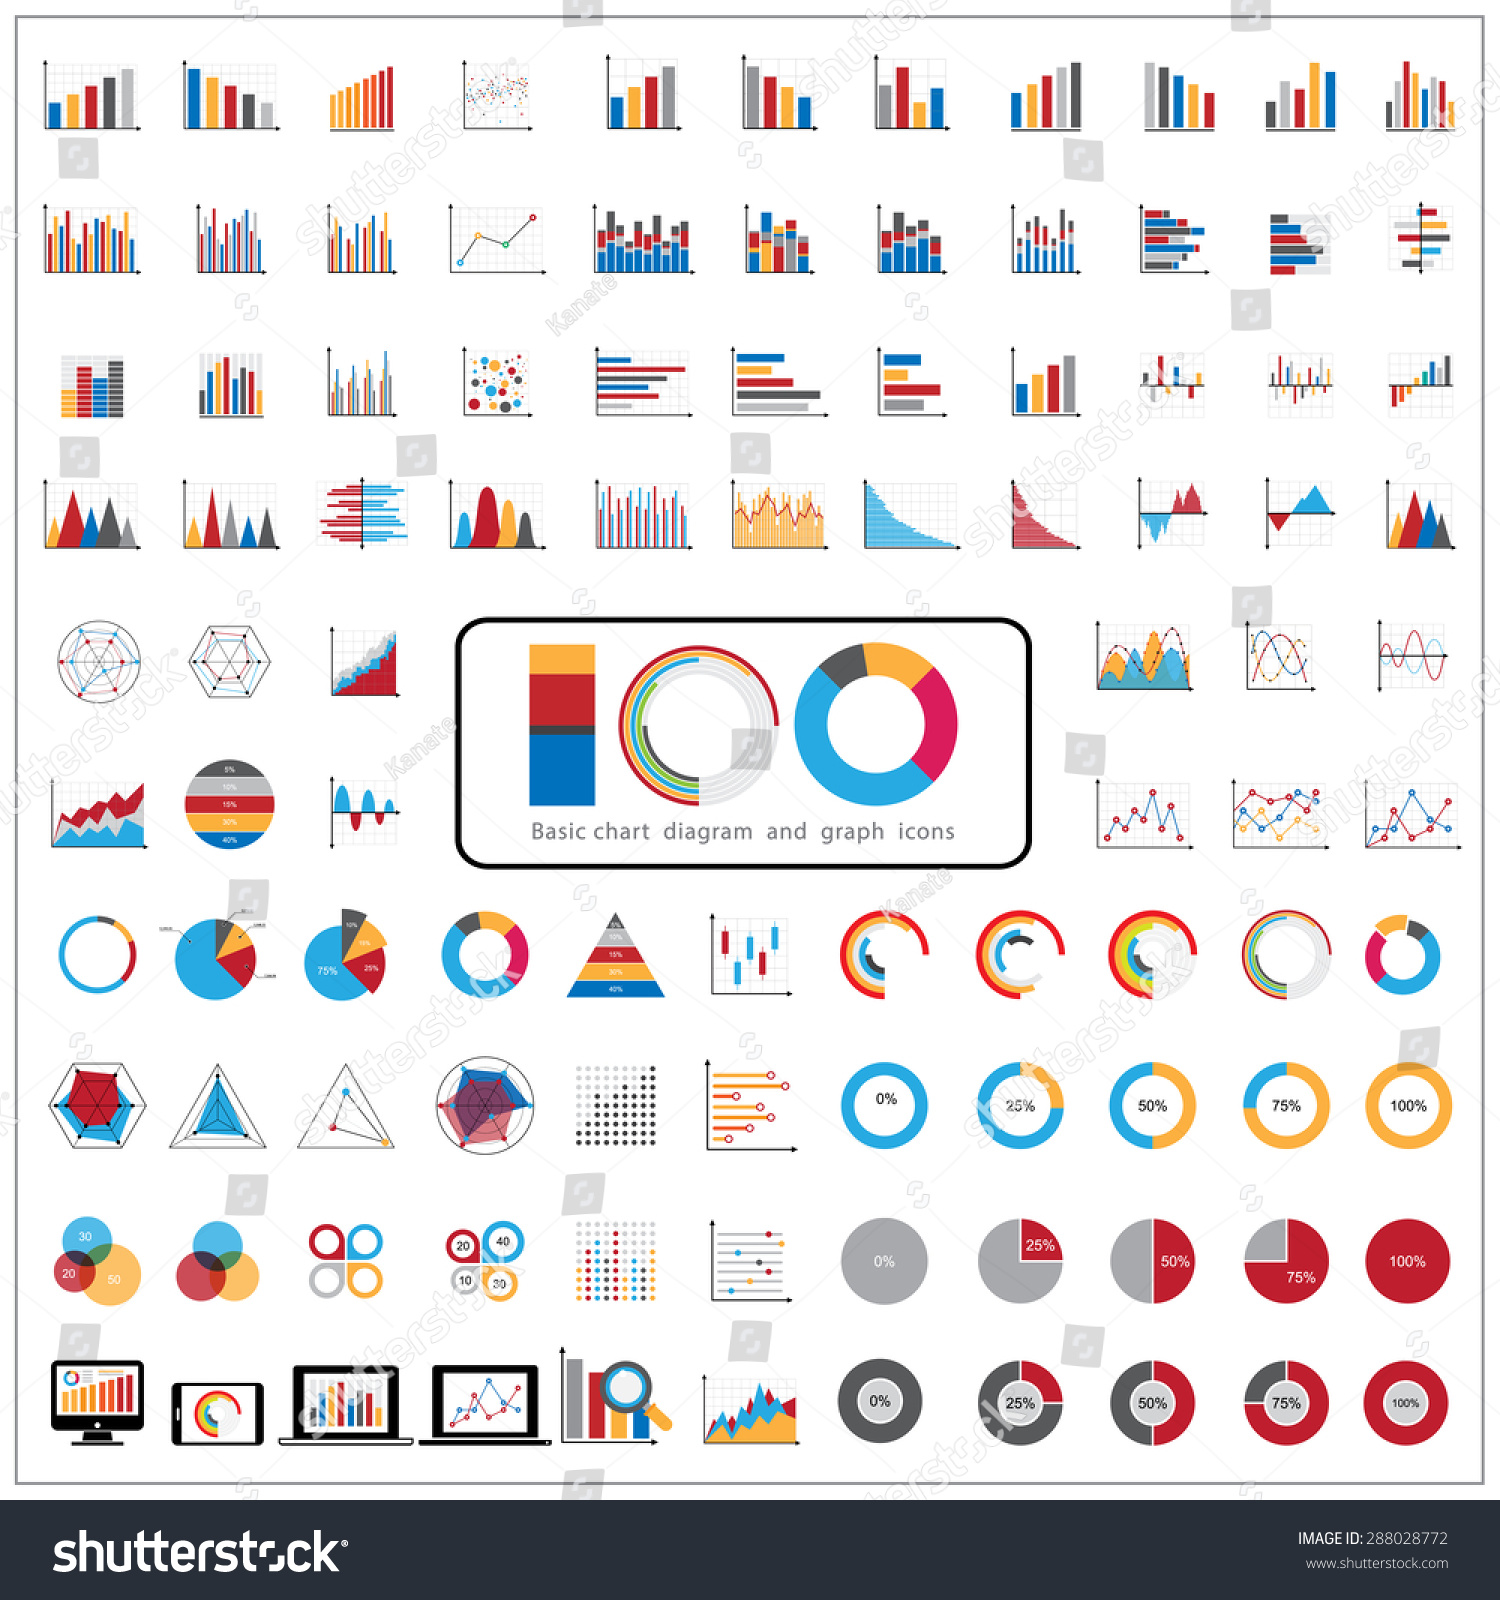 100 Charts Diagrams And Business Graphs Icons Set. Stock Vector